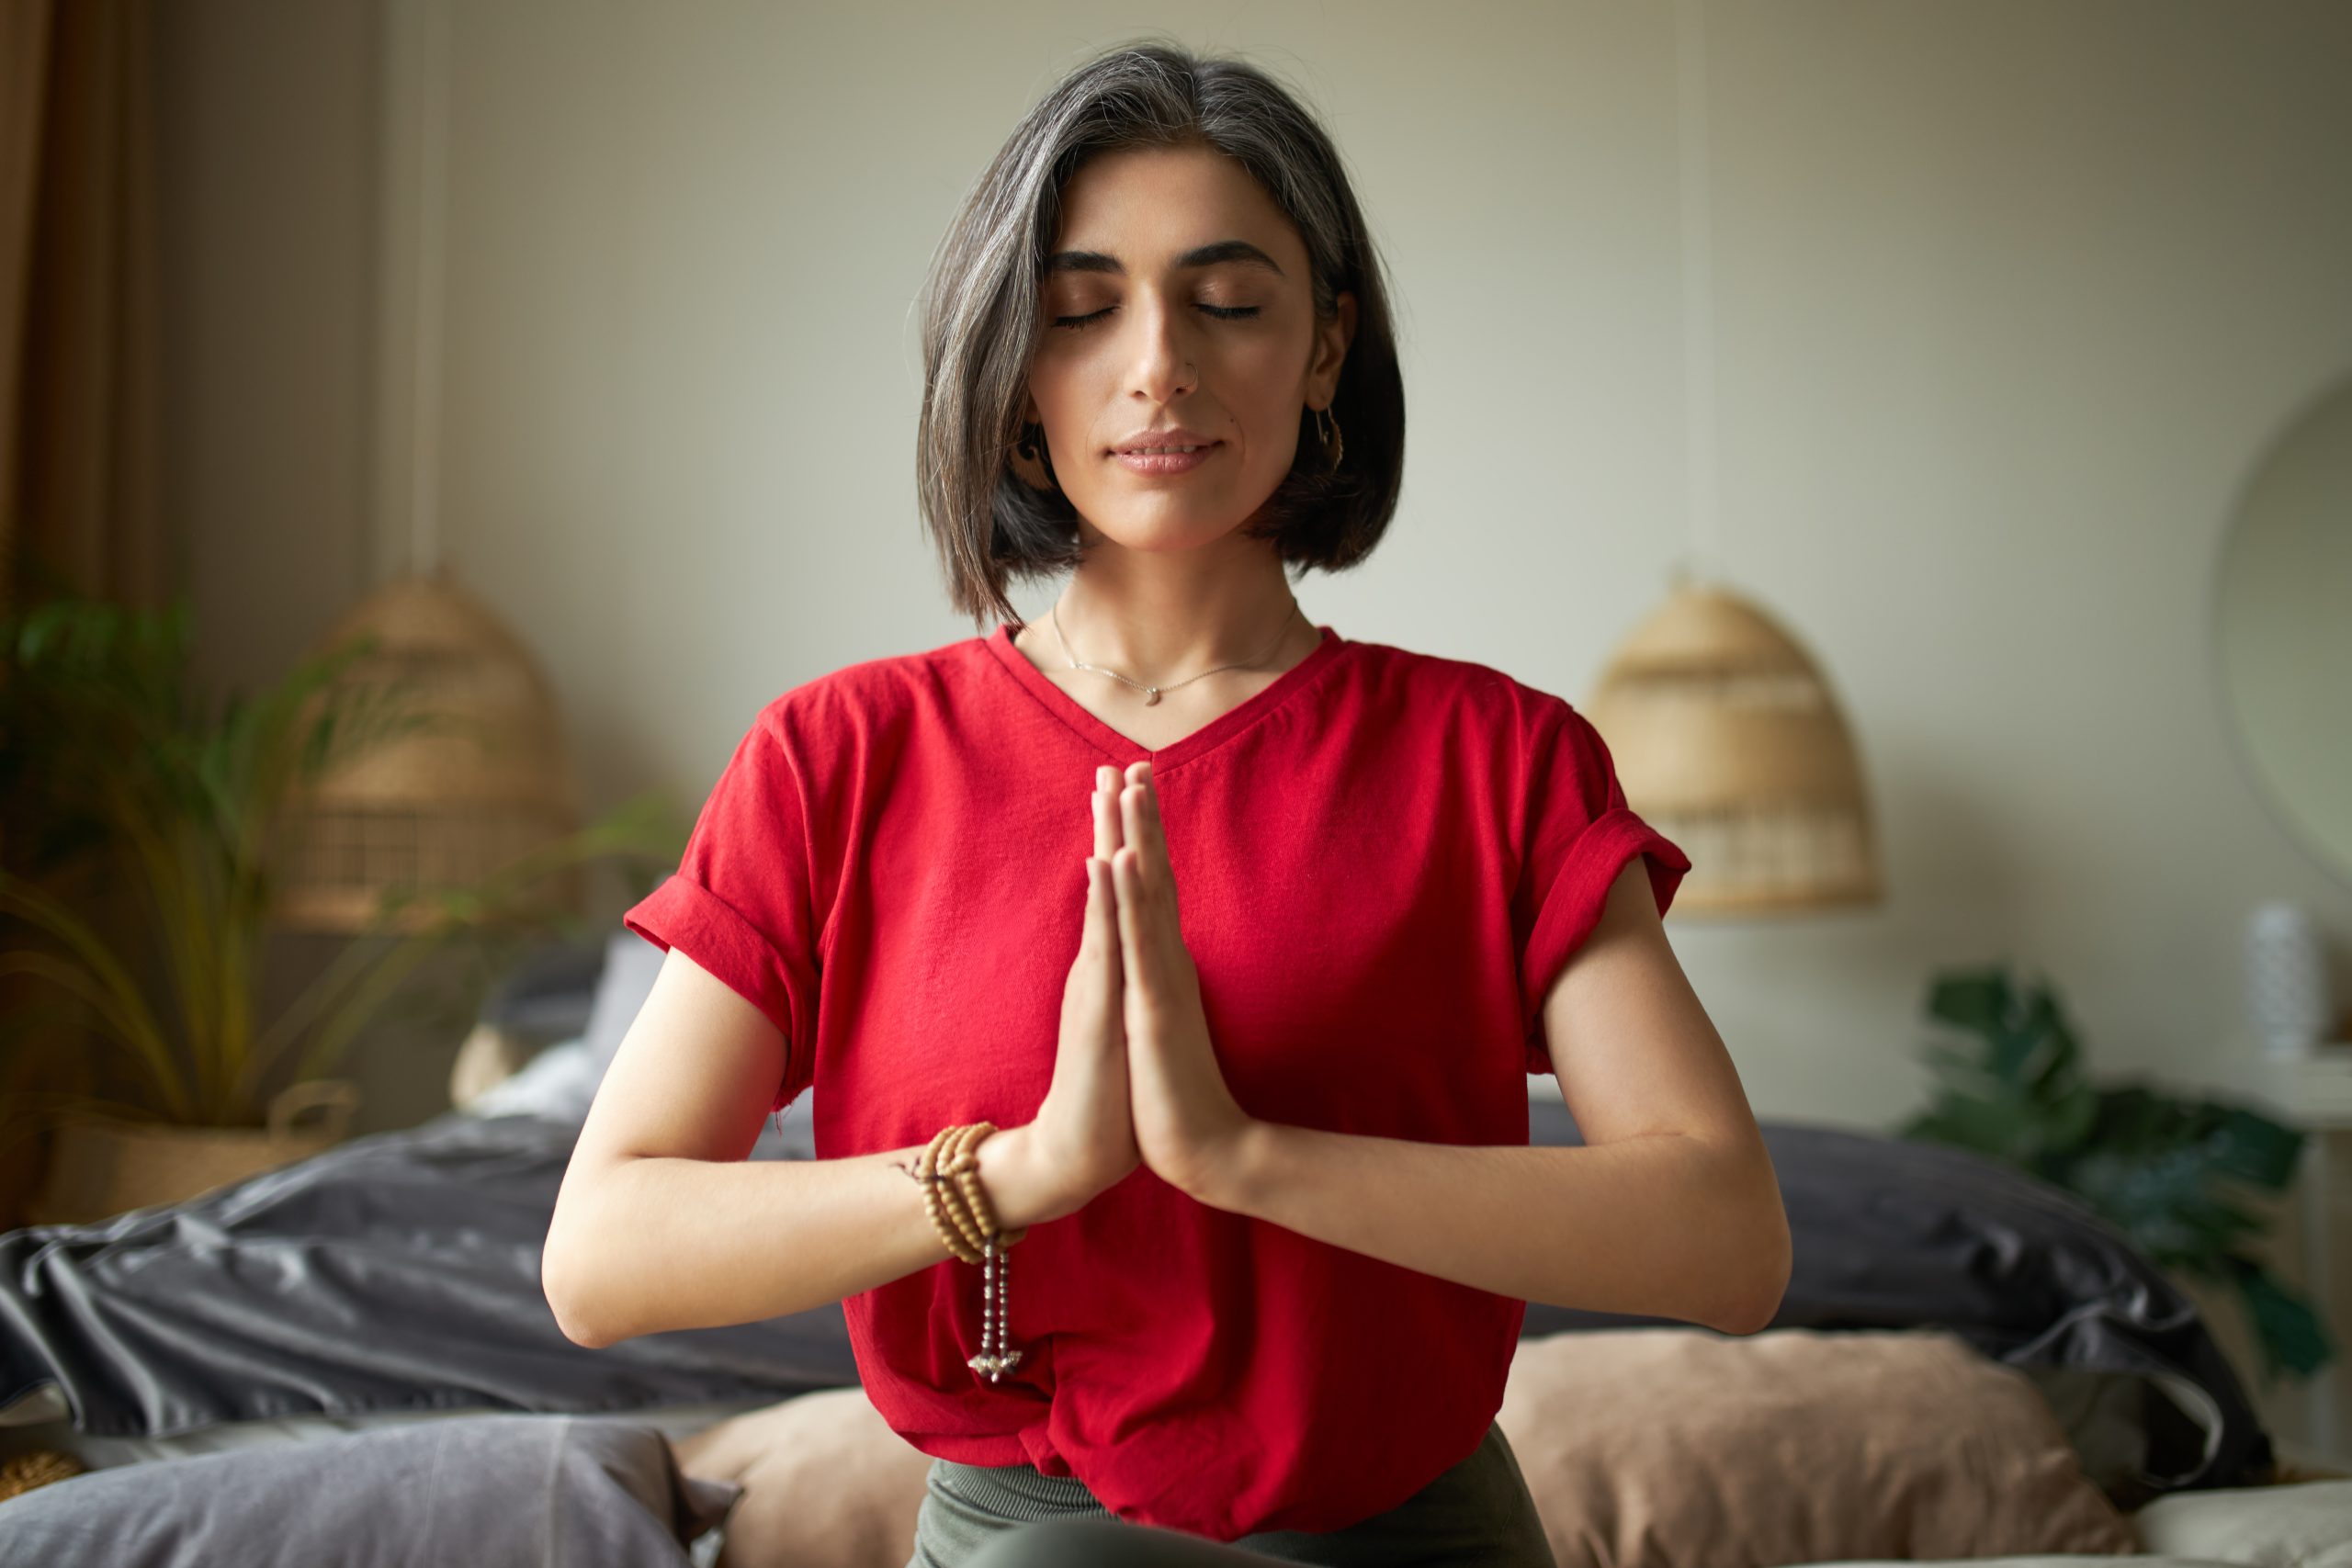 A person holds the Namaste pose and meditates, embodying the practice of what therapy is.